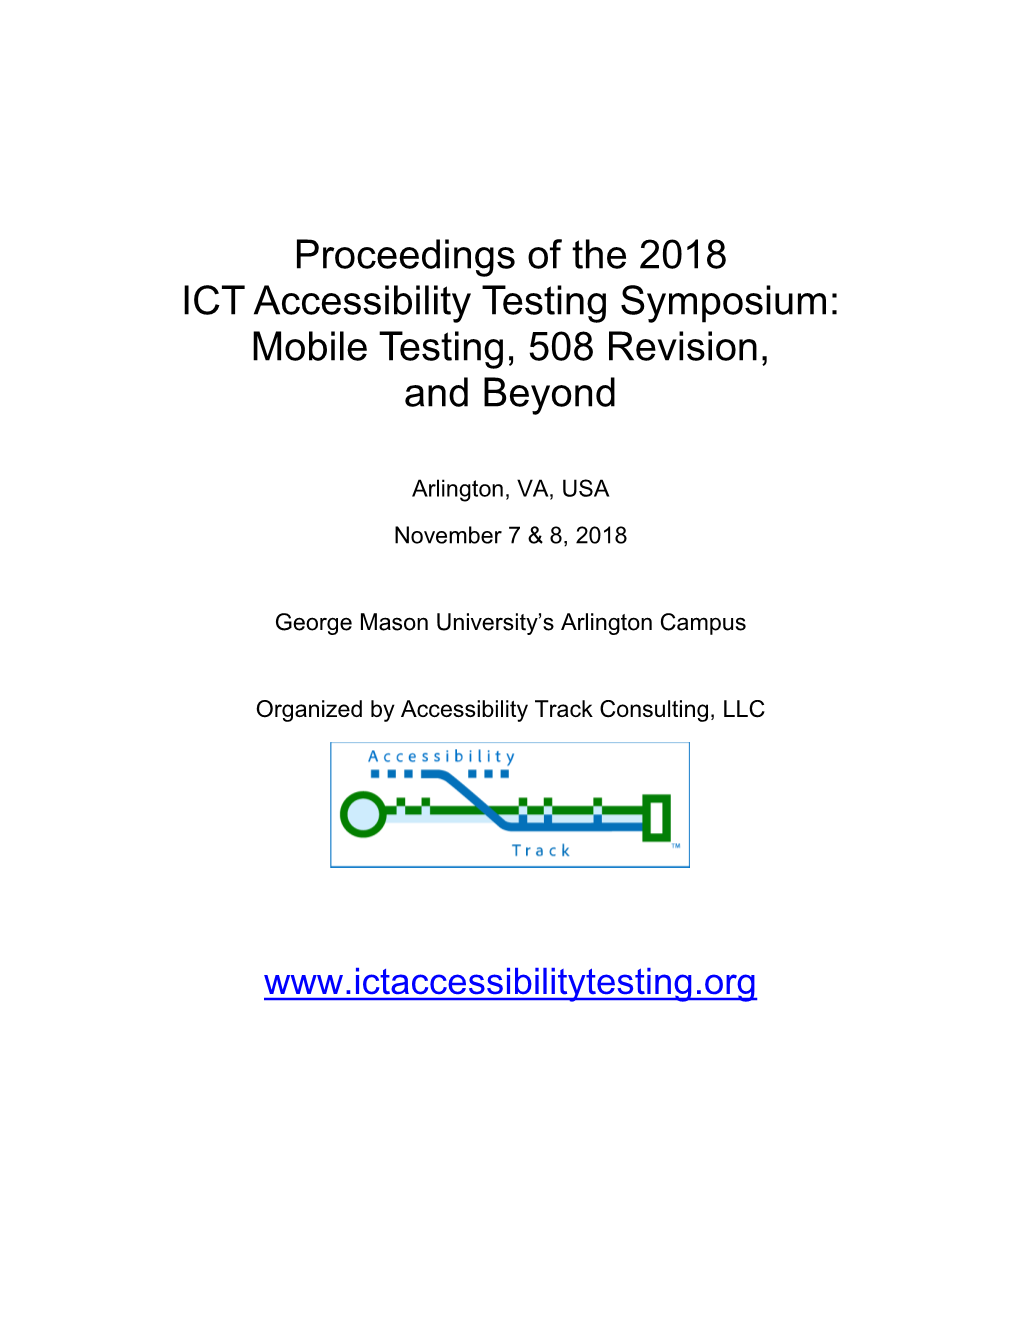 Proceedings of the 2018 ICT Accessibility Testing Symposium: Mobile Testing, 508 Revision, and Beyond